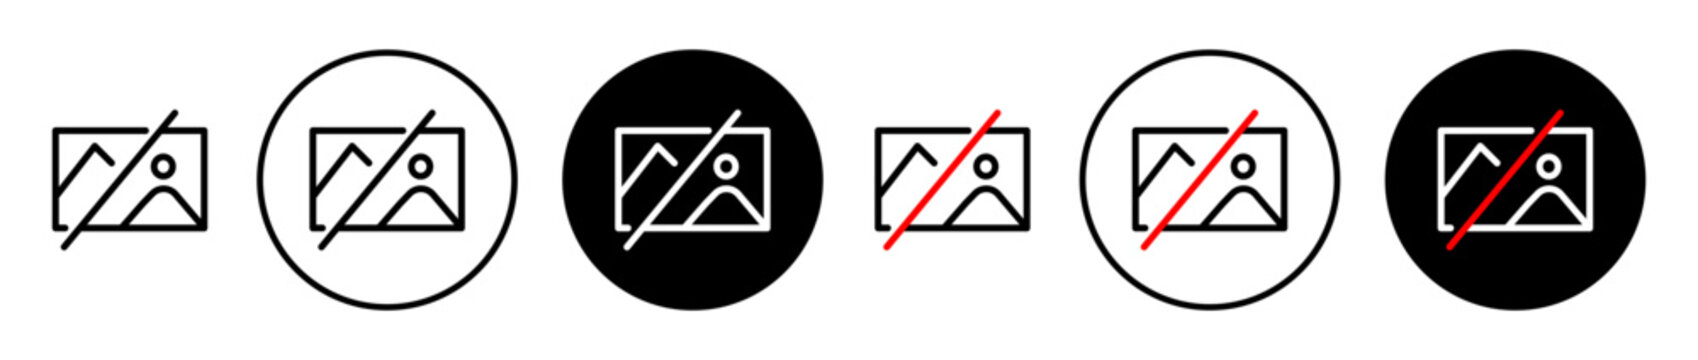 no image vector icon set. image not available symbol. missing thumbnail photo vector symbol in black color.